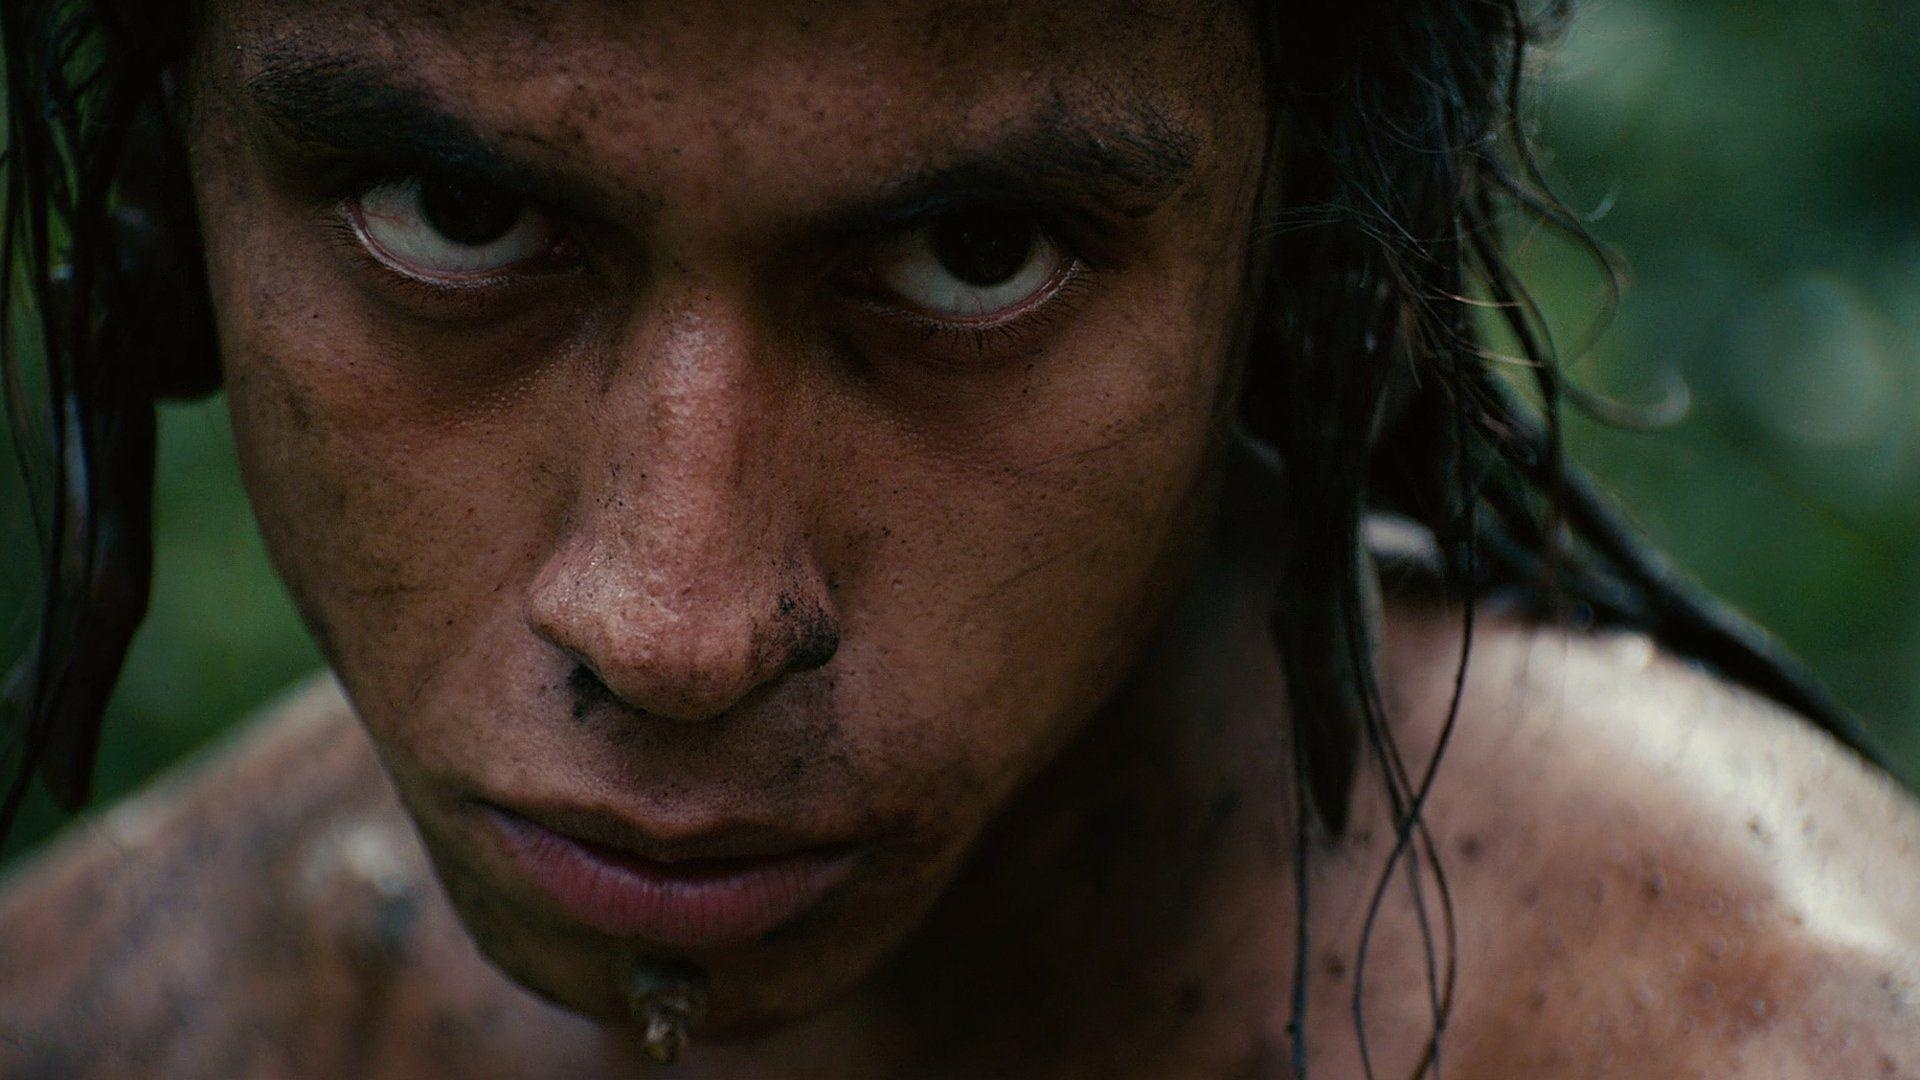 Apocalypto: The film portrays the hero's journey of a young man named Jaguar Paw. 1920x1080 Full HD Wallpaper.